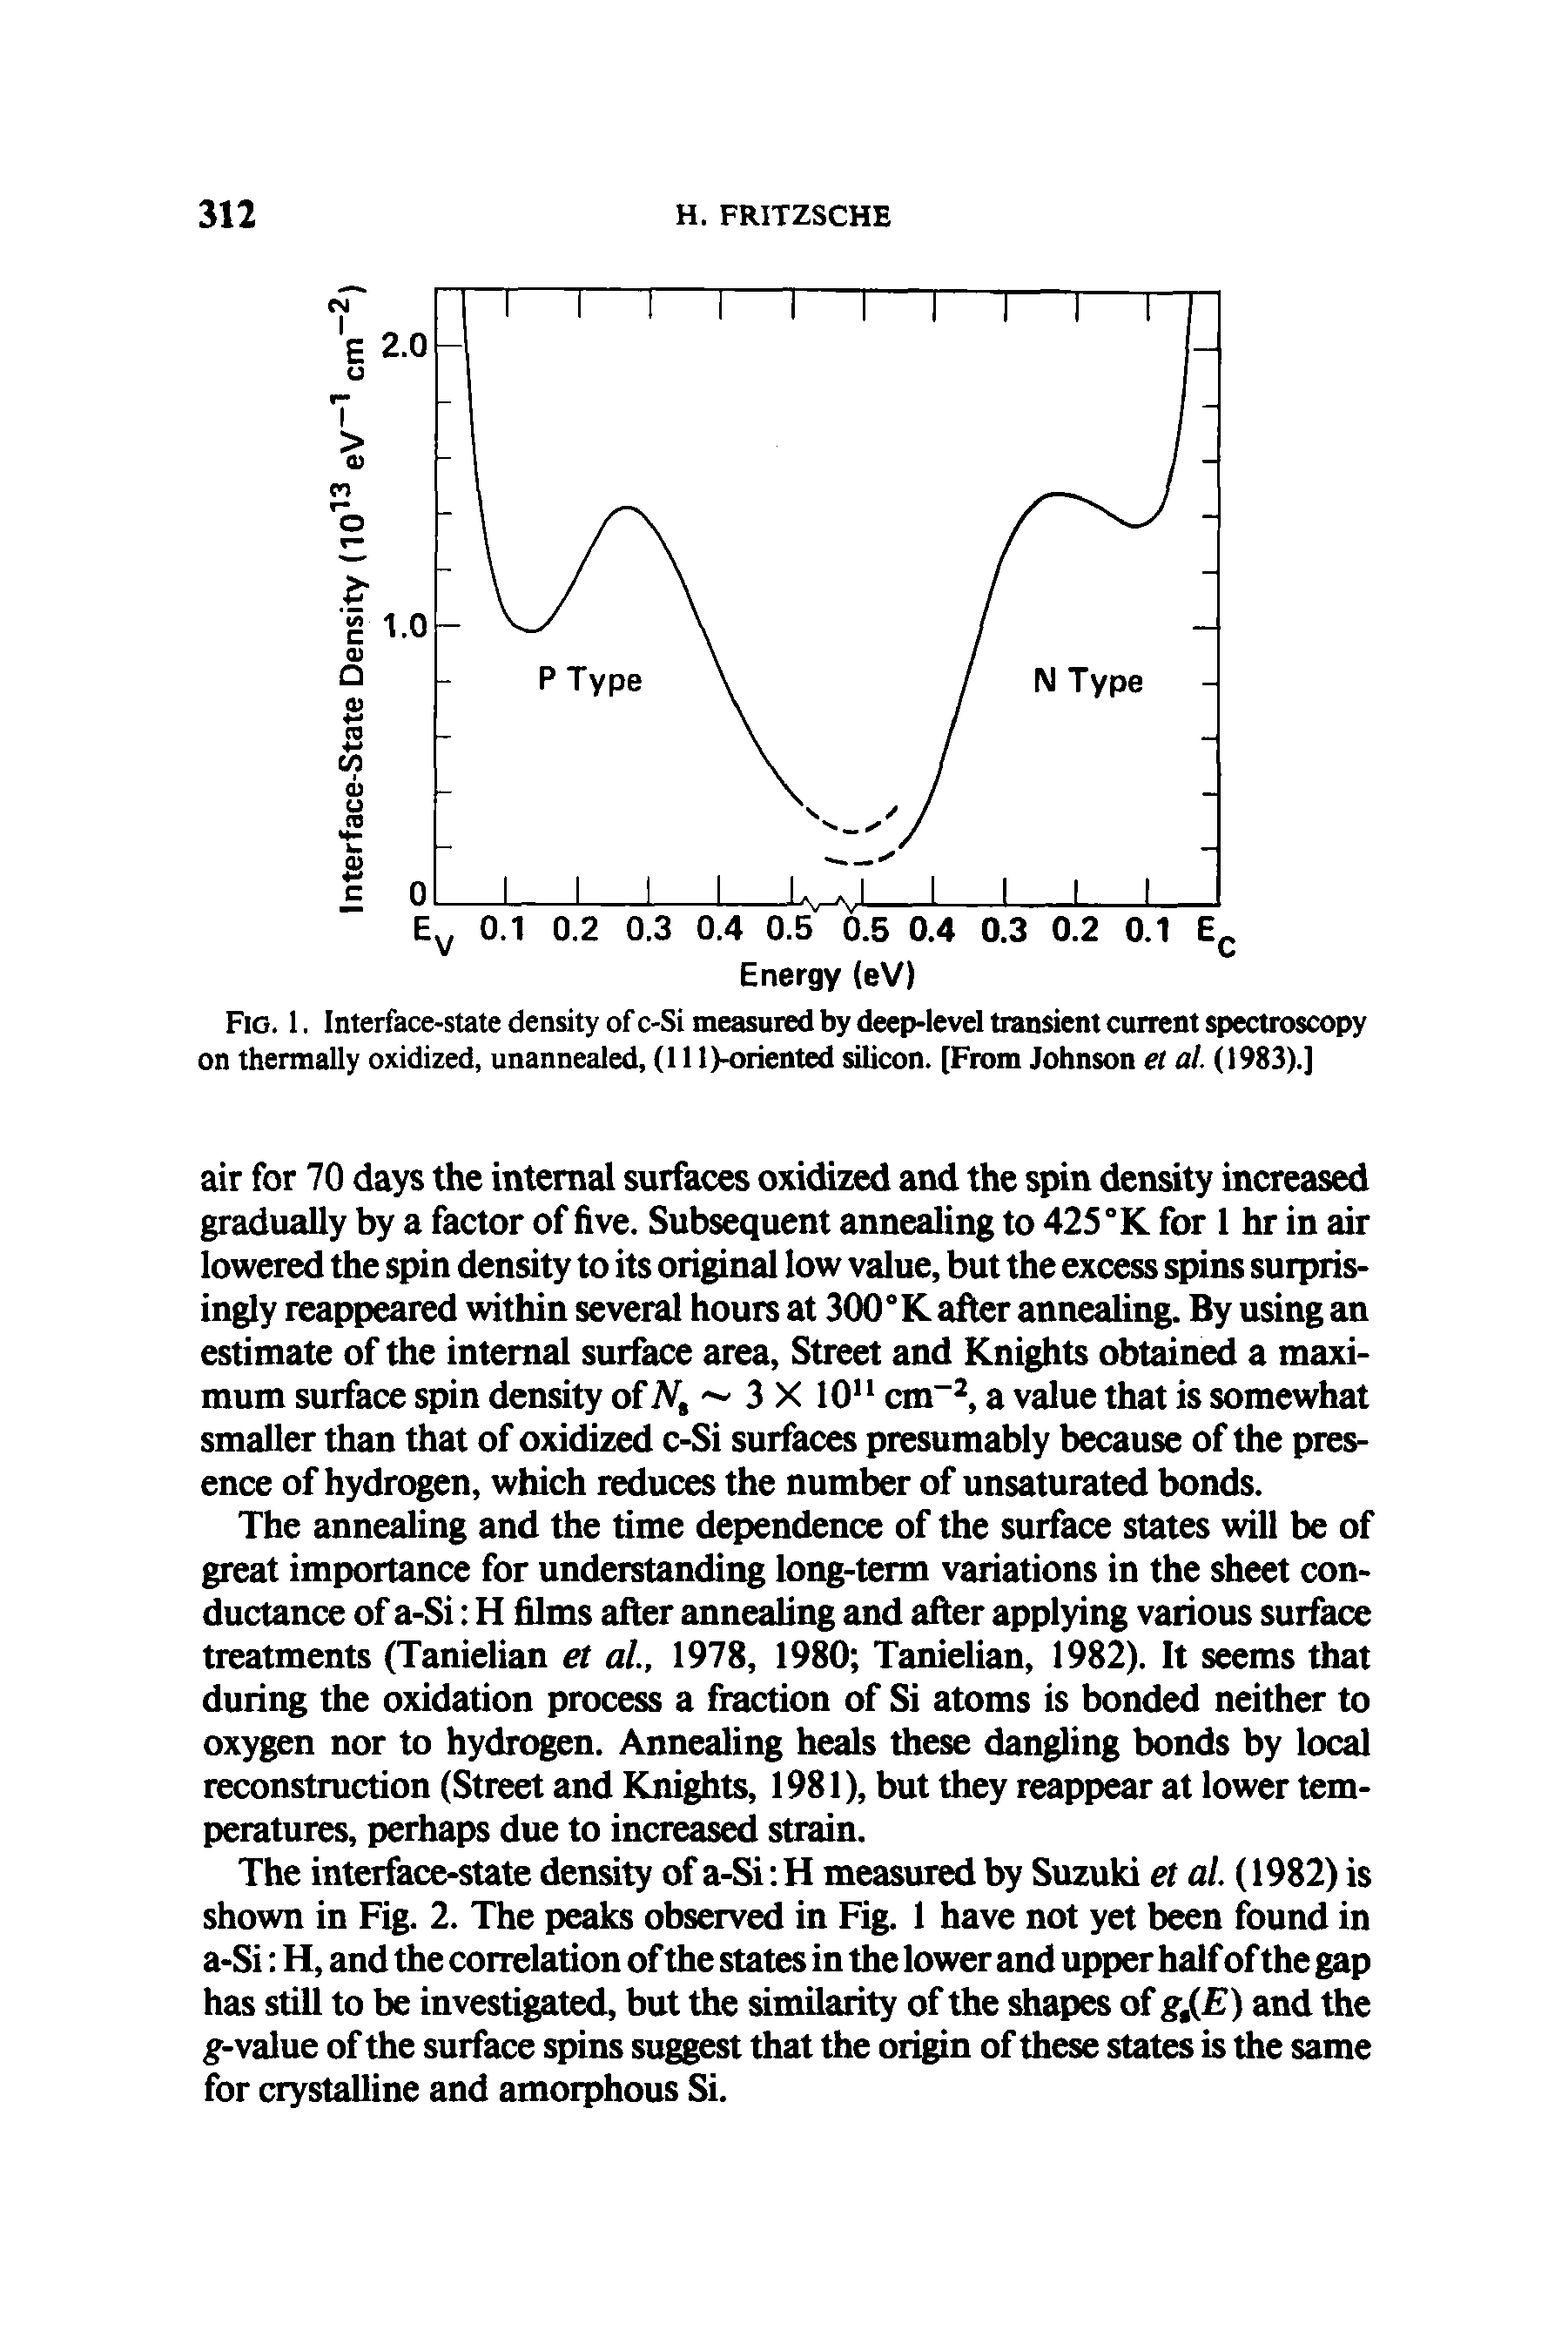 Fig. 1. Interface-state density of c-Si measured by deep-level transient current spectroscopy on thermally oxidized, unannealed, (11 l)-oriented silicon. [From Johnson et al (1983).]...